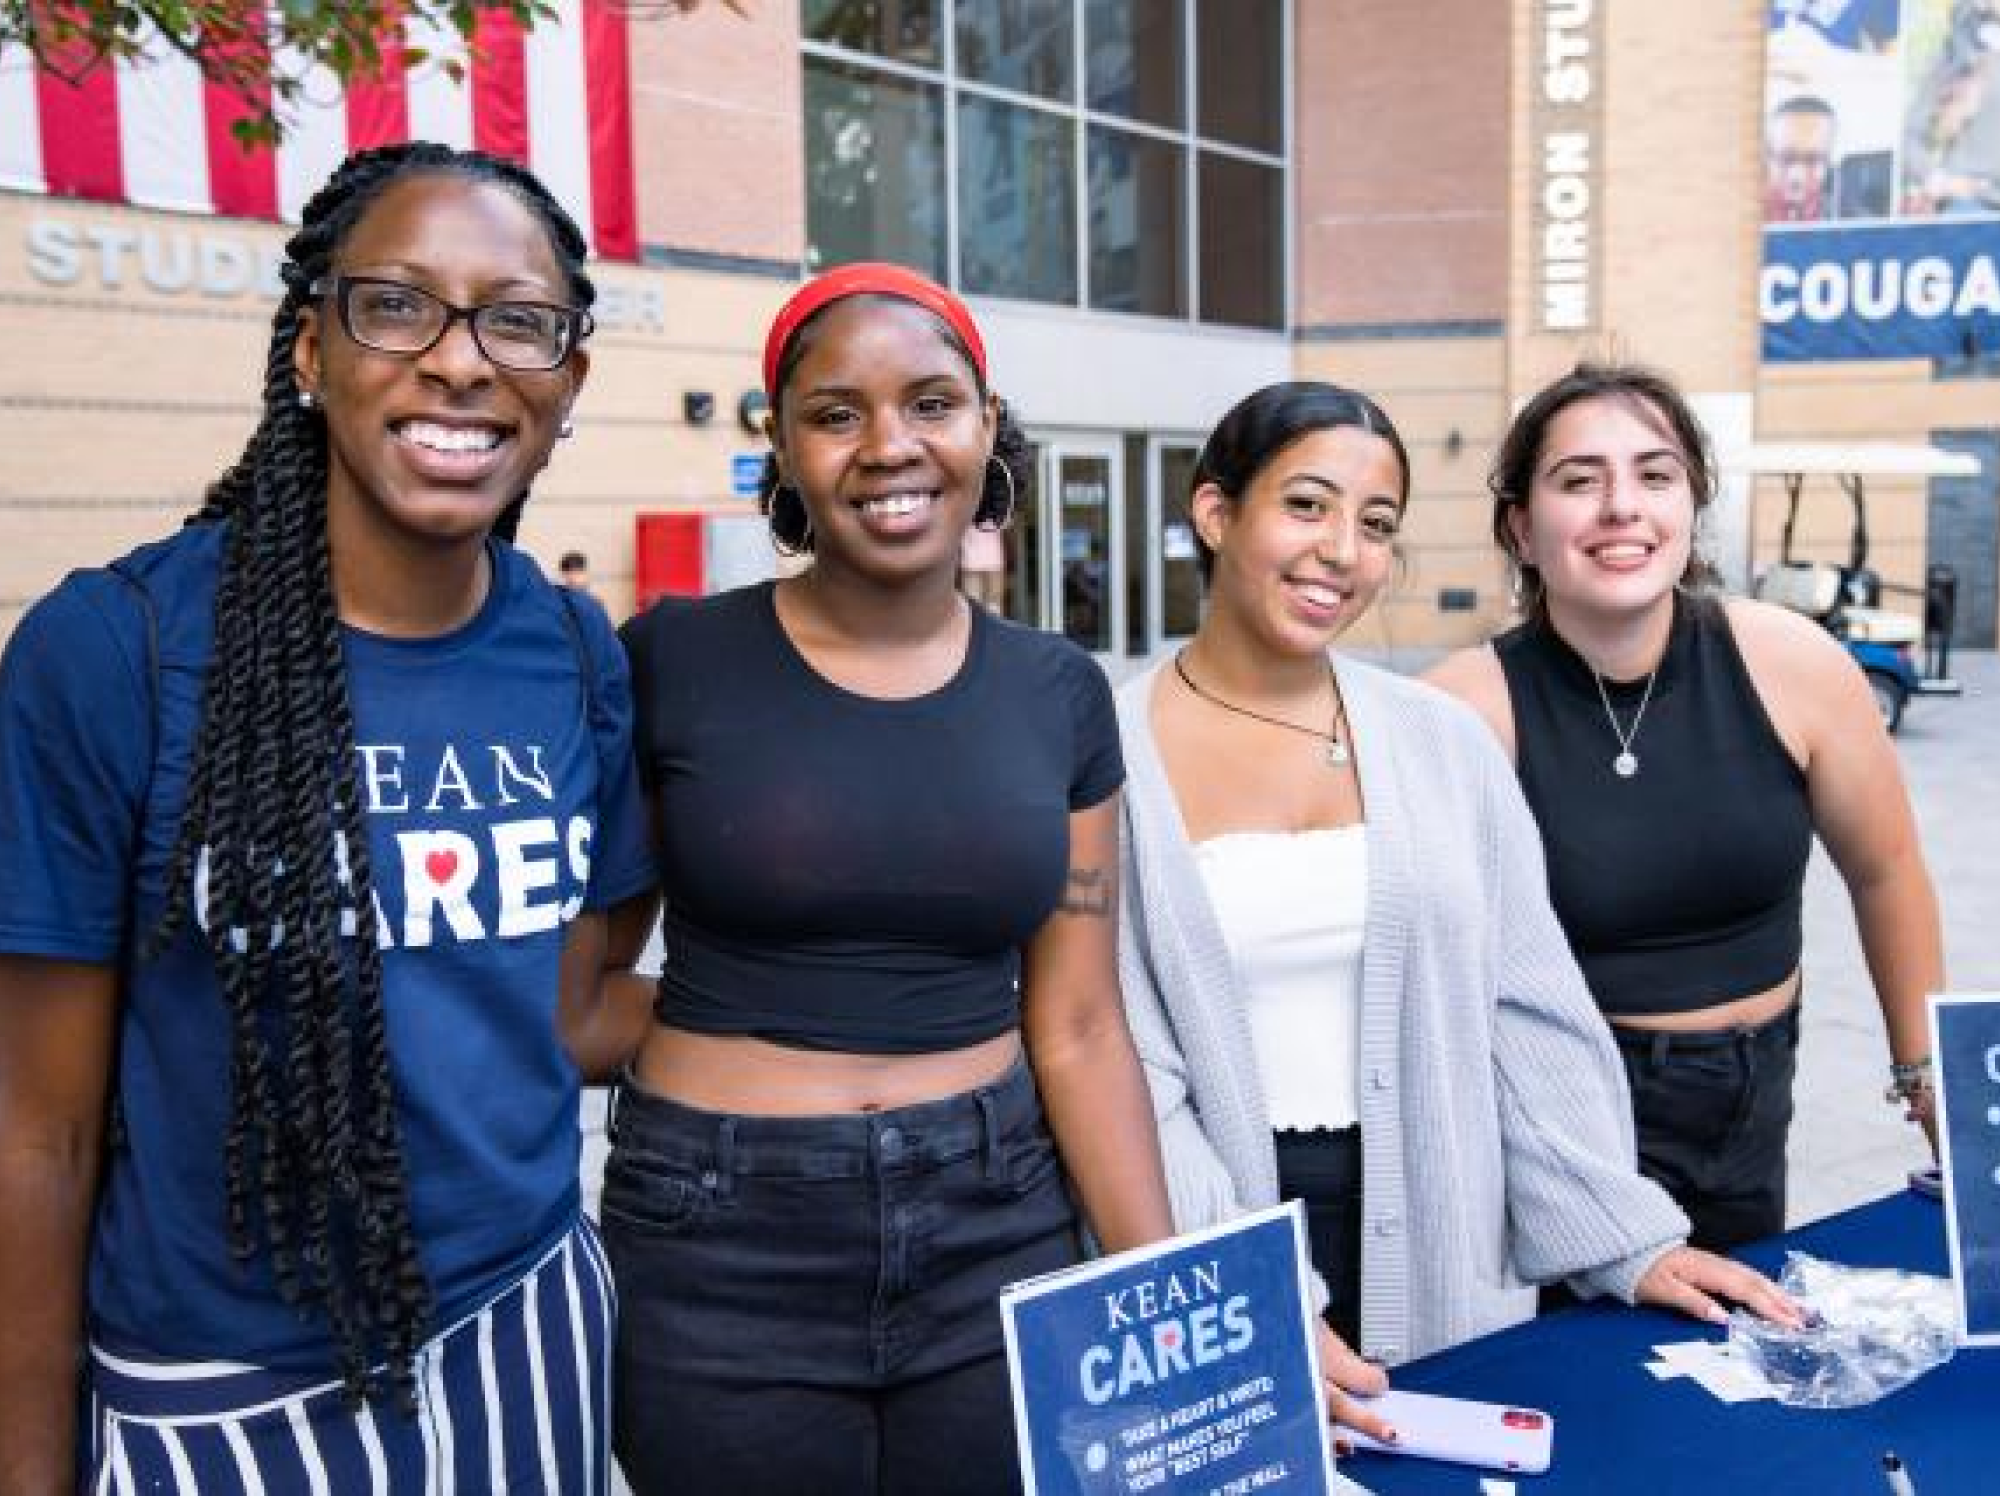 Four students together at a booth for Kean Cares at a volunteer event